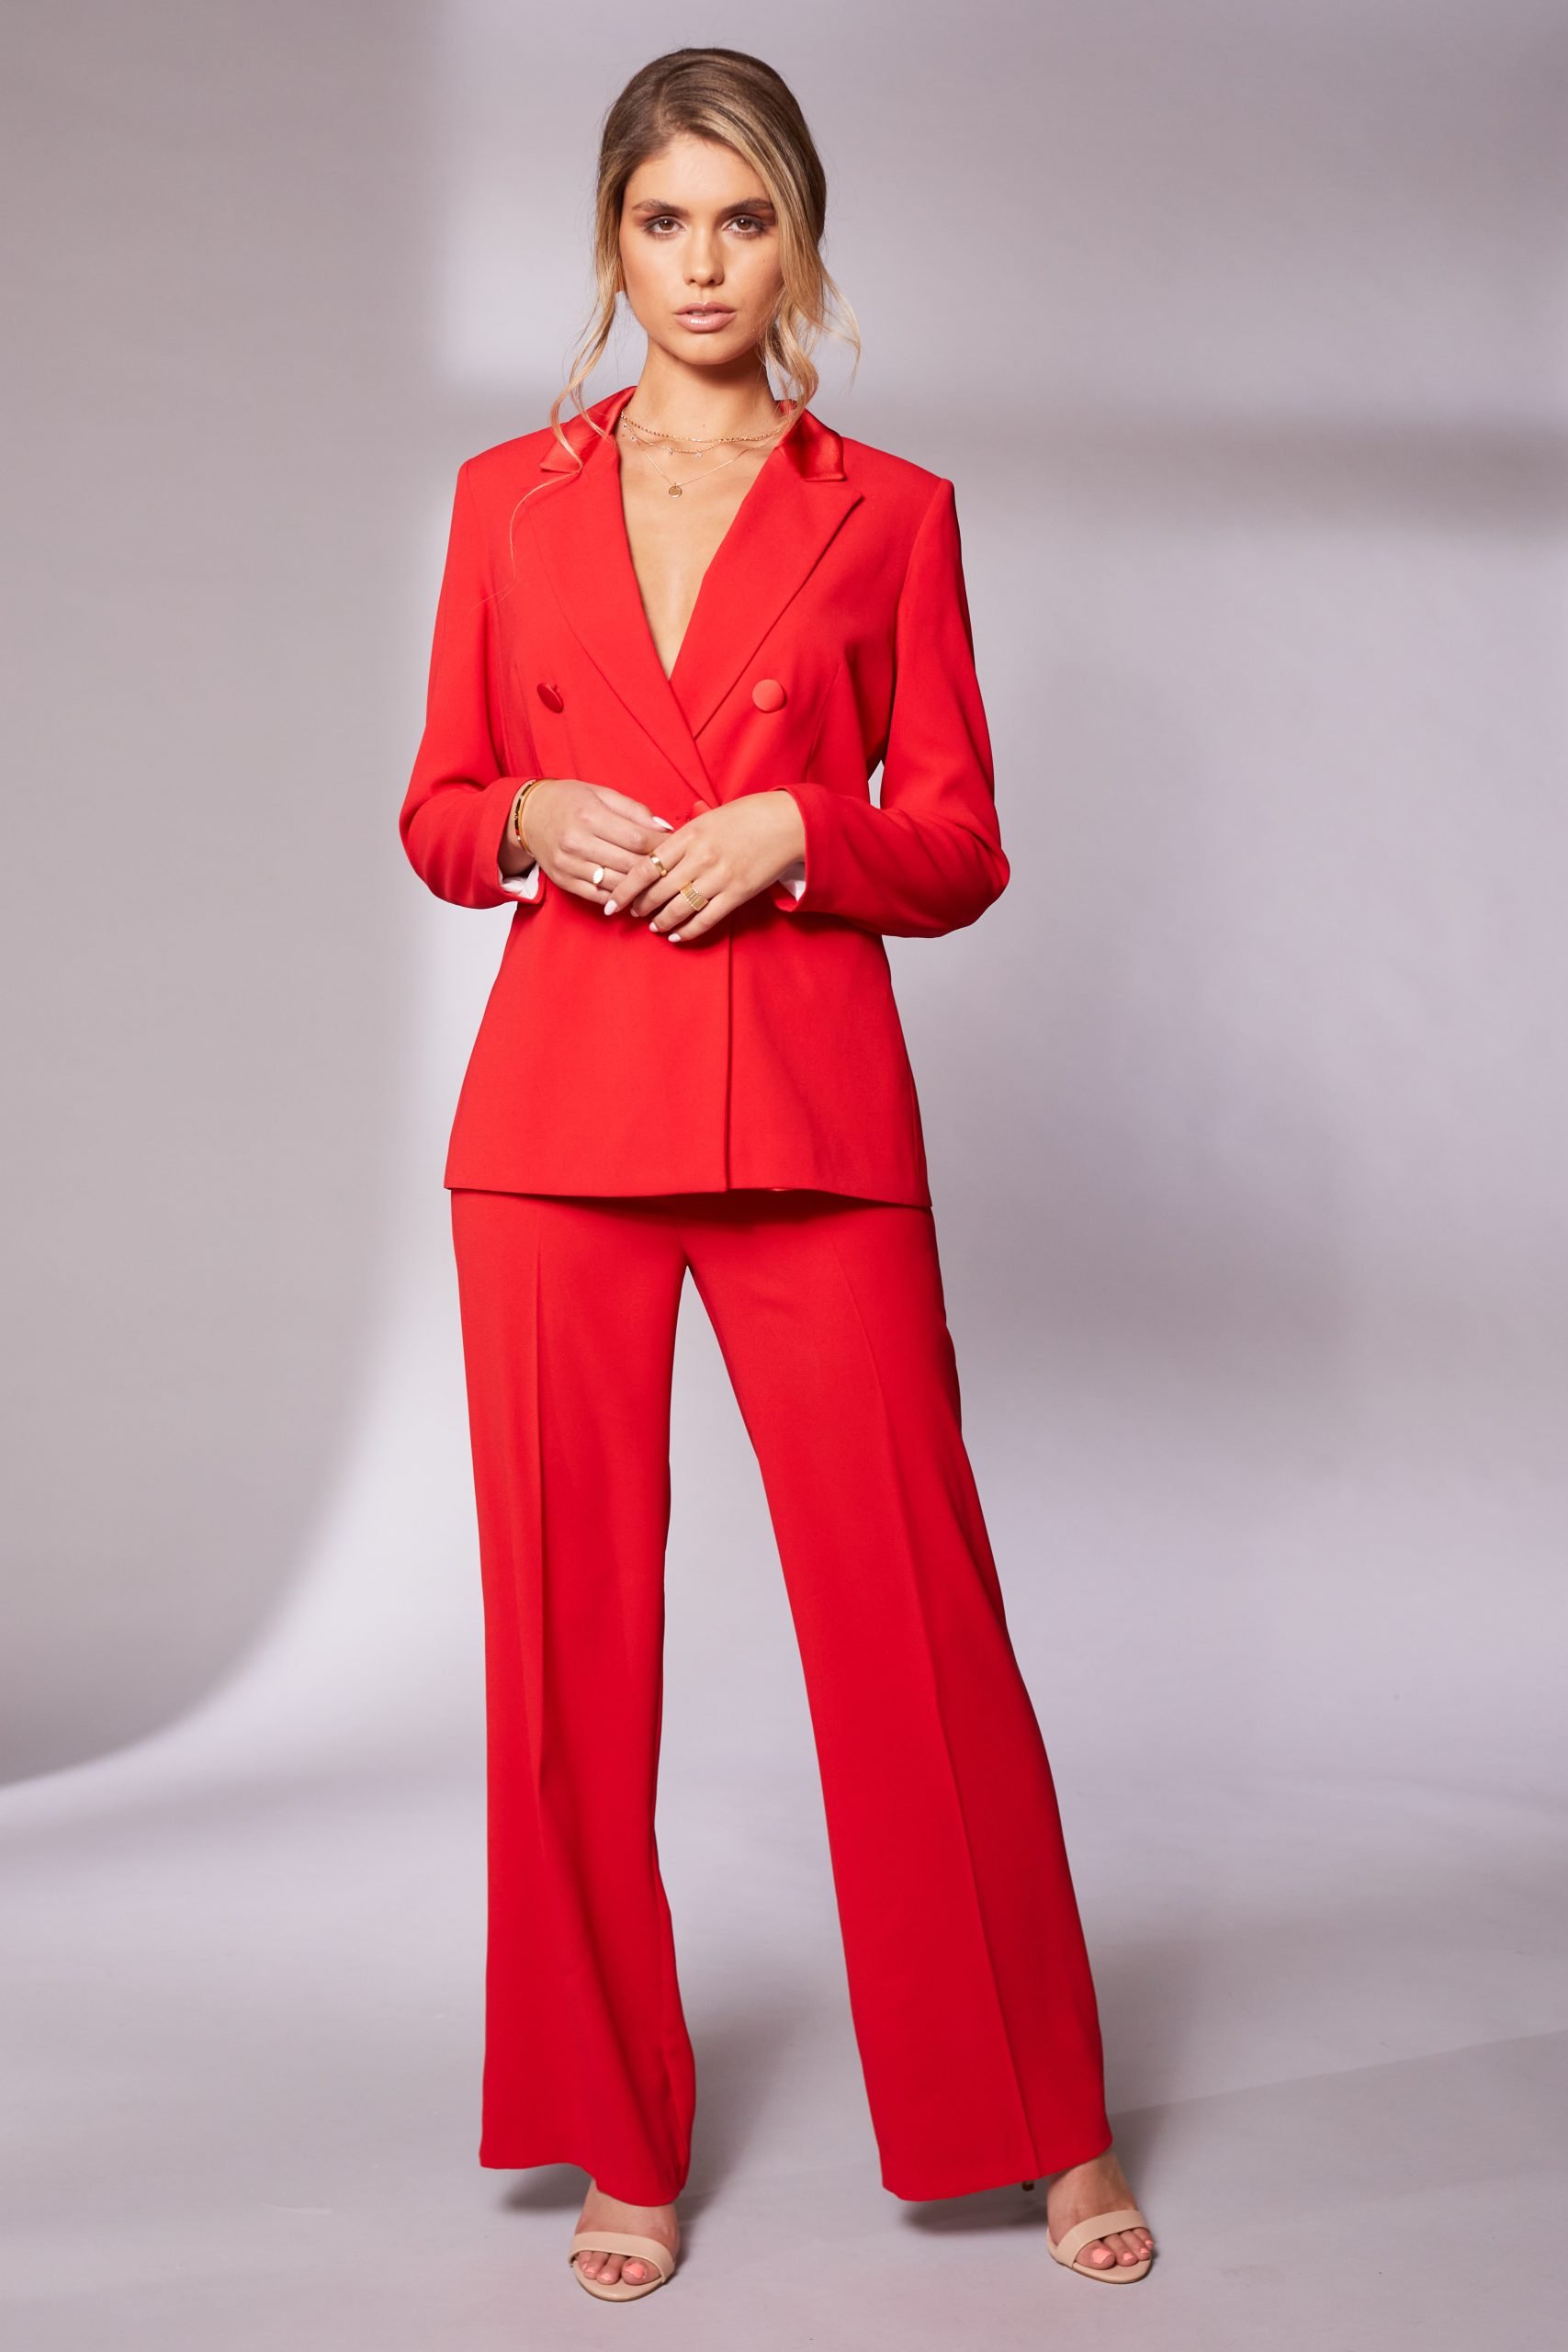 Blue Orange Black Red Yellow Blazer And Pant Suit Women Office Ladies  Business Work Wear Formal 2 Piece Set Jacket And Trouser - Pant Suits -  AliExpress